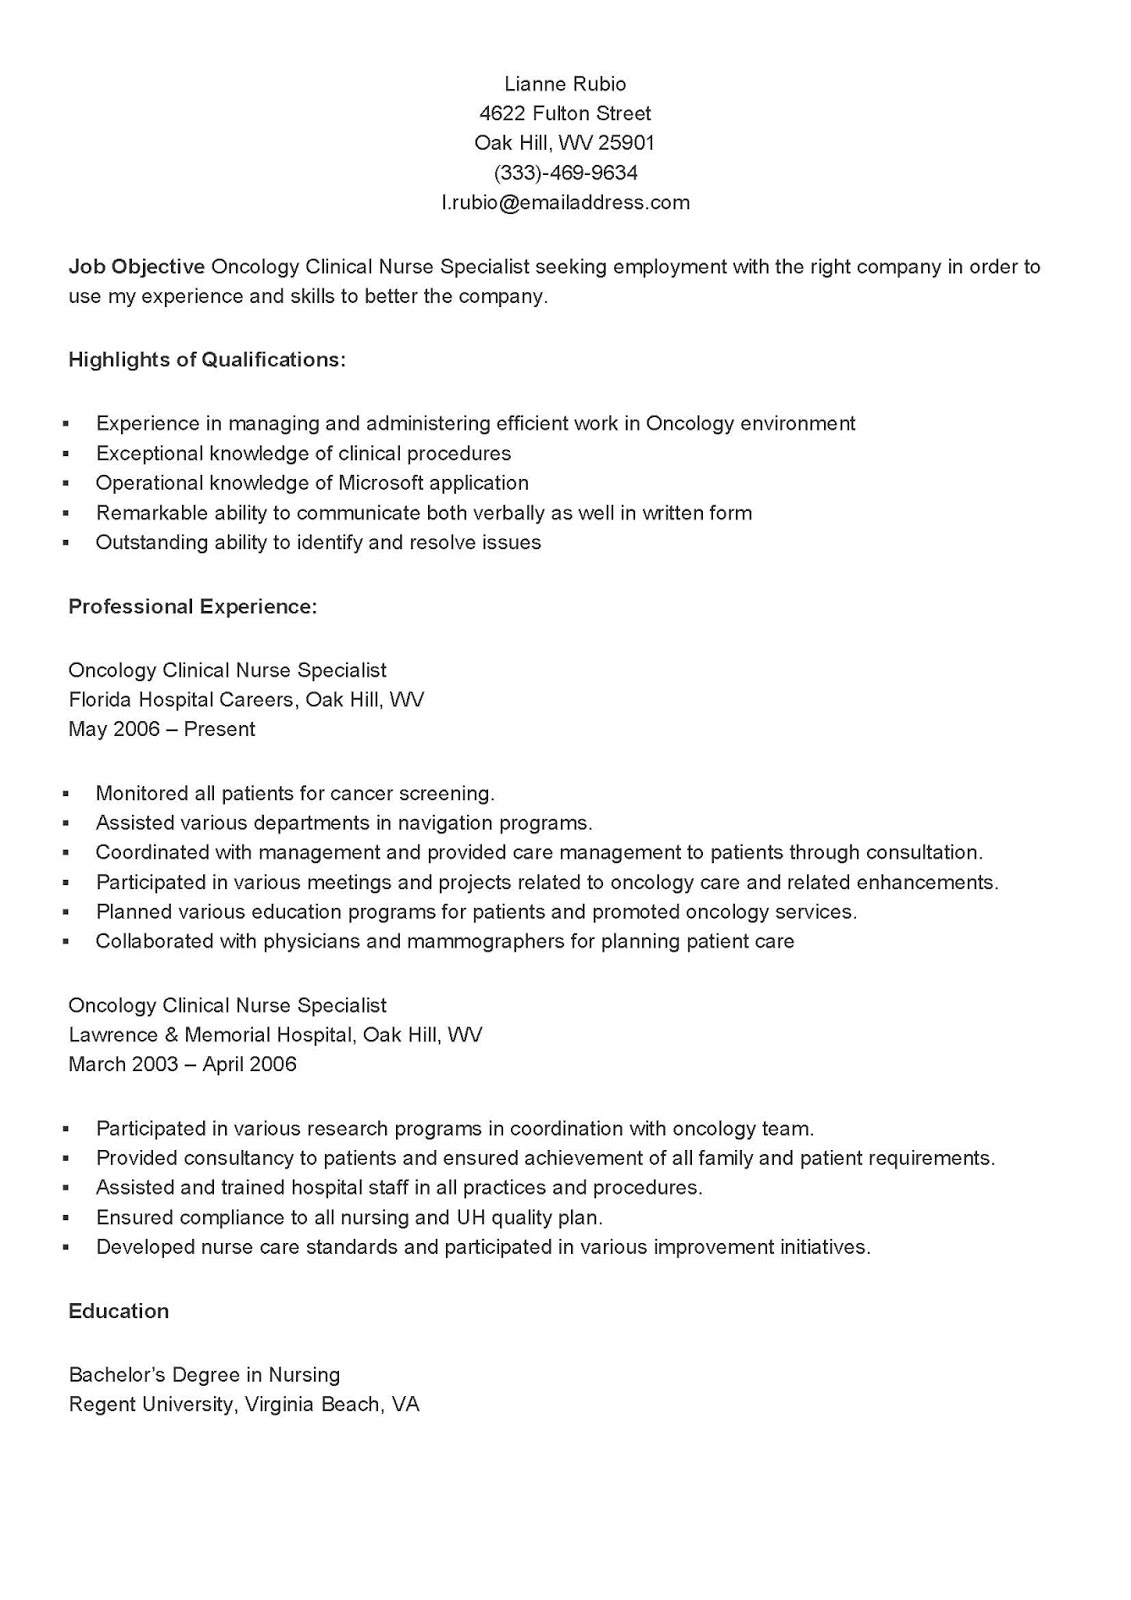 Resume cover letter for contract specialist